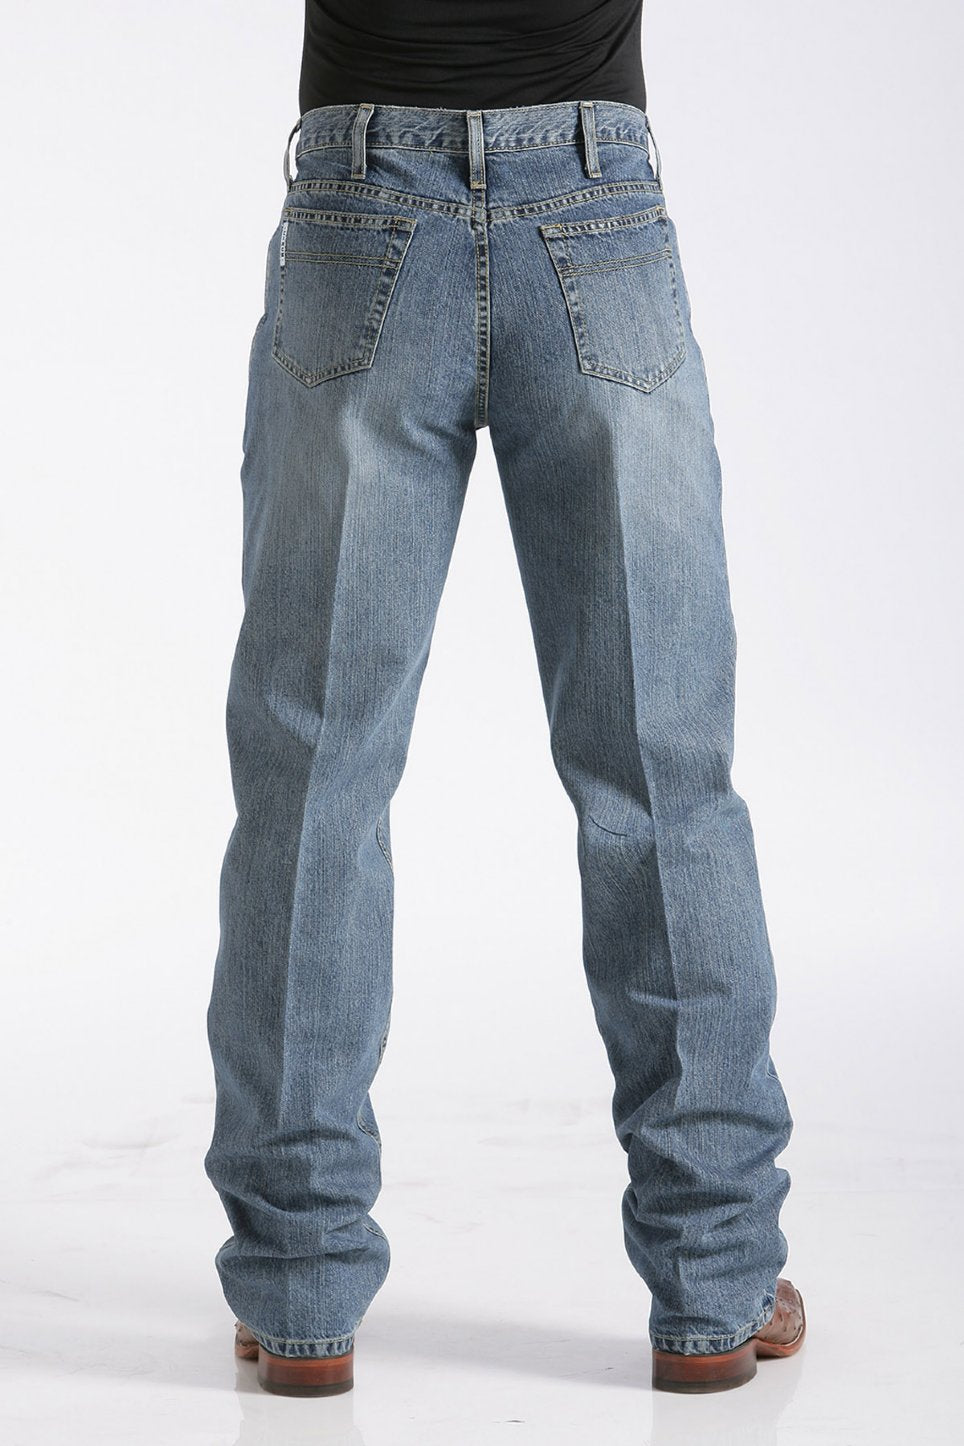 Cinch | White Label Relaxed Fit Medium Stonewash Jean